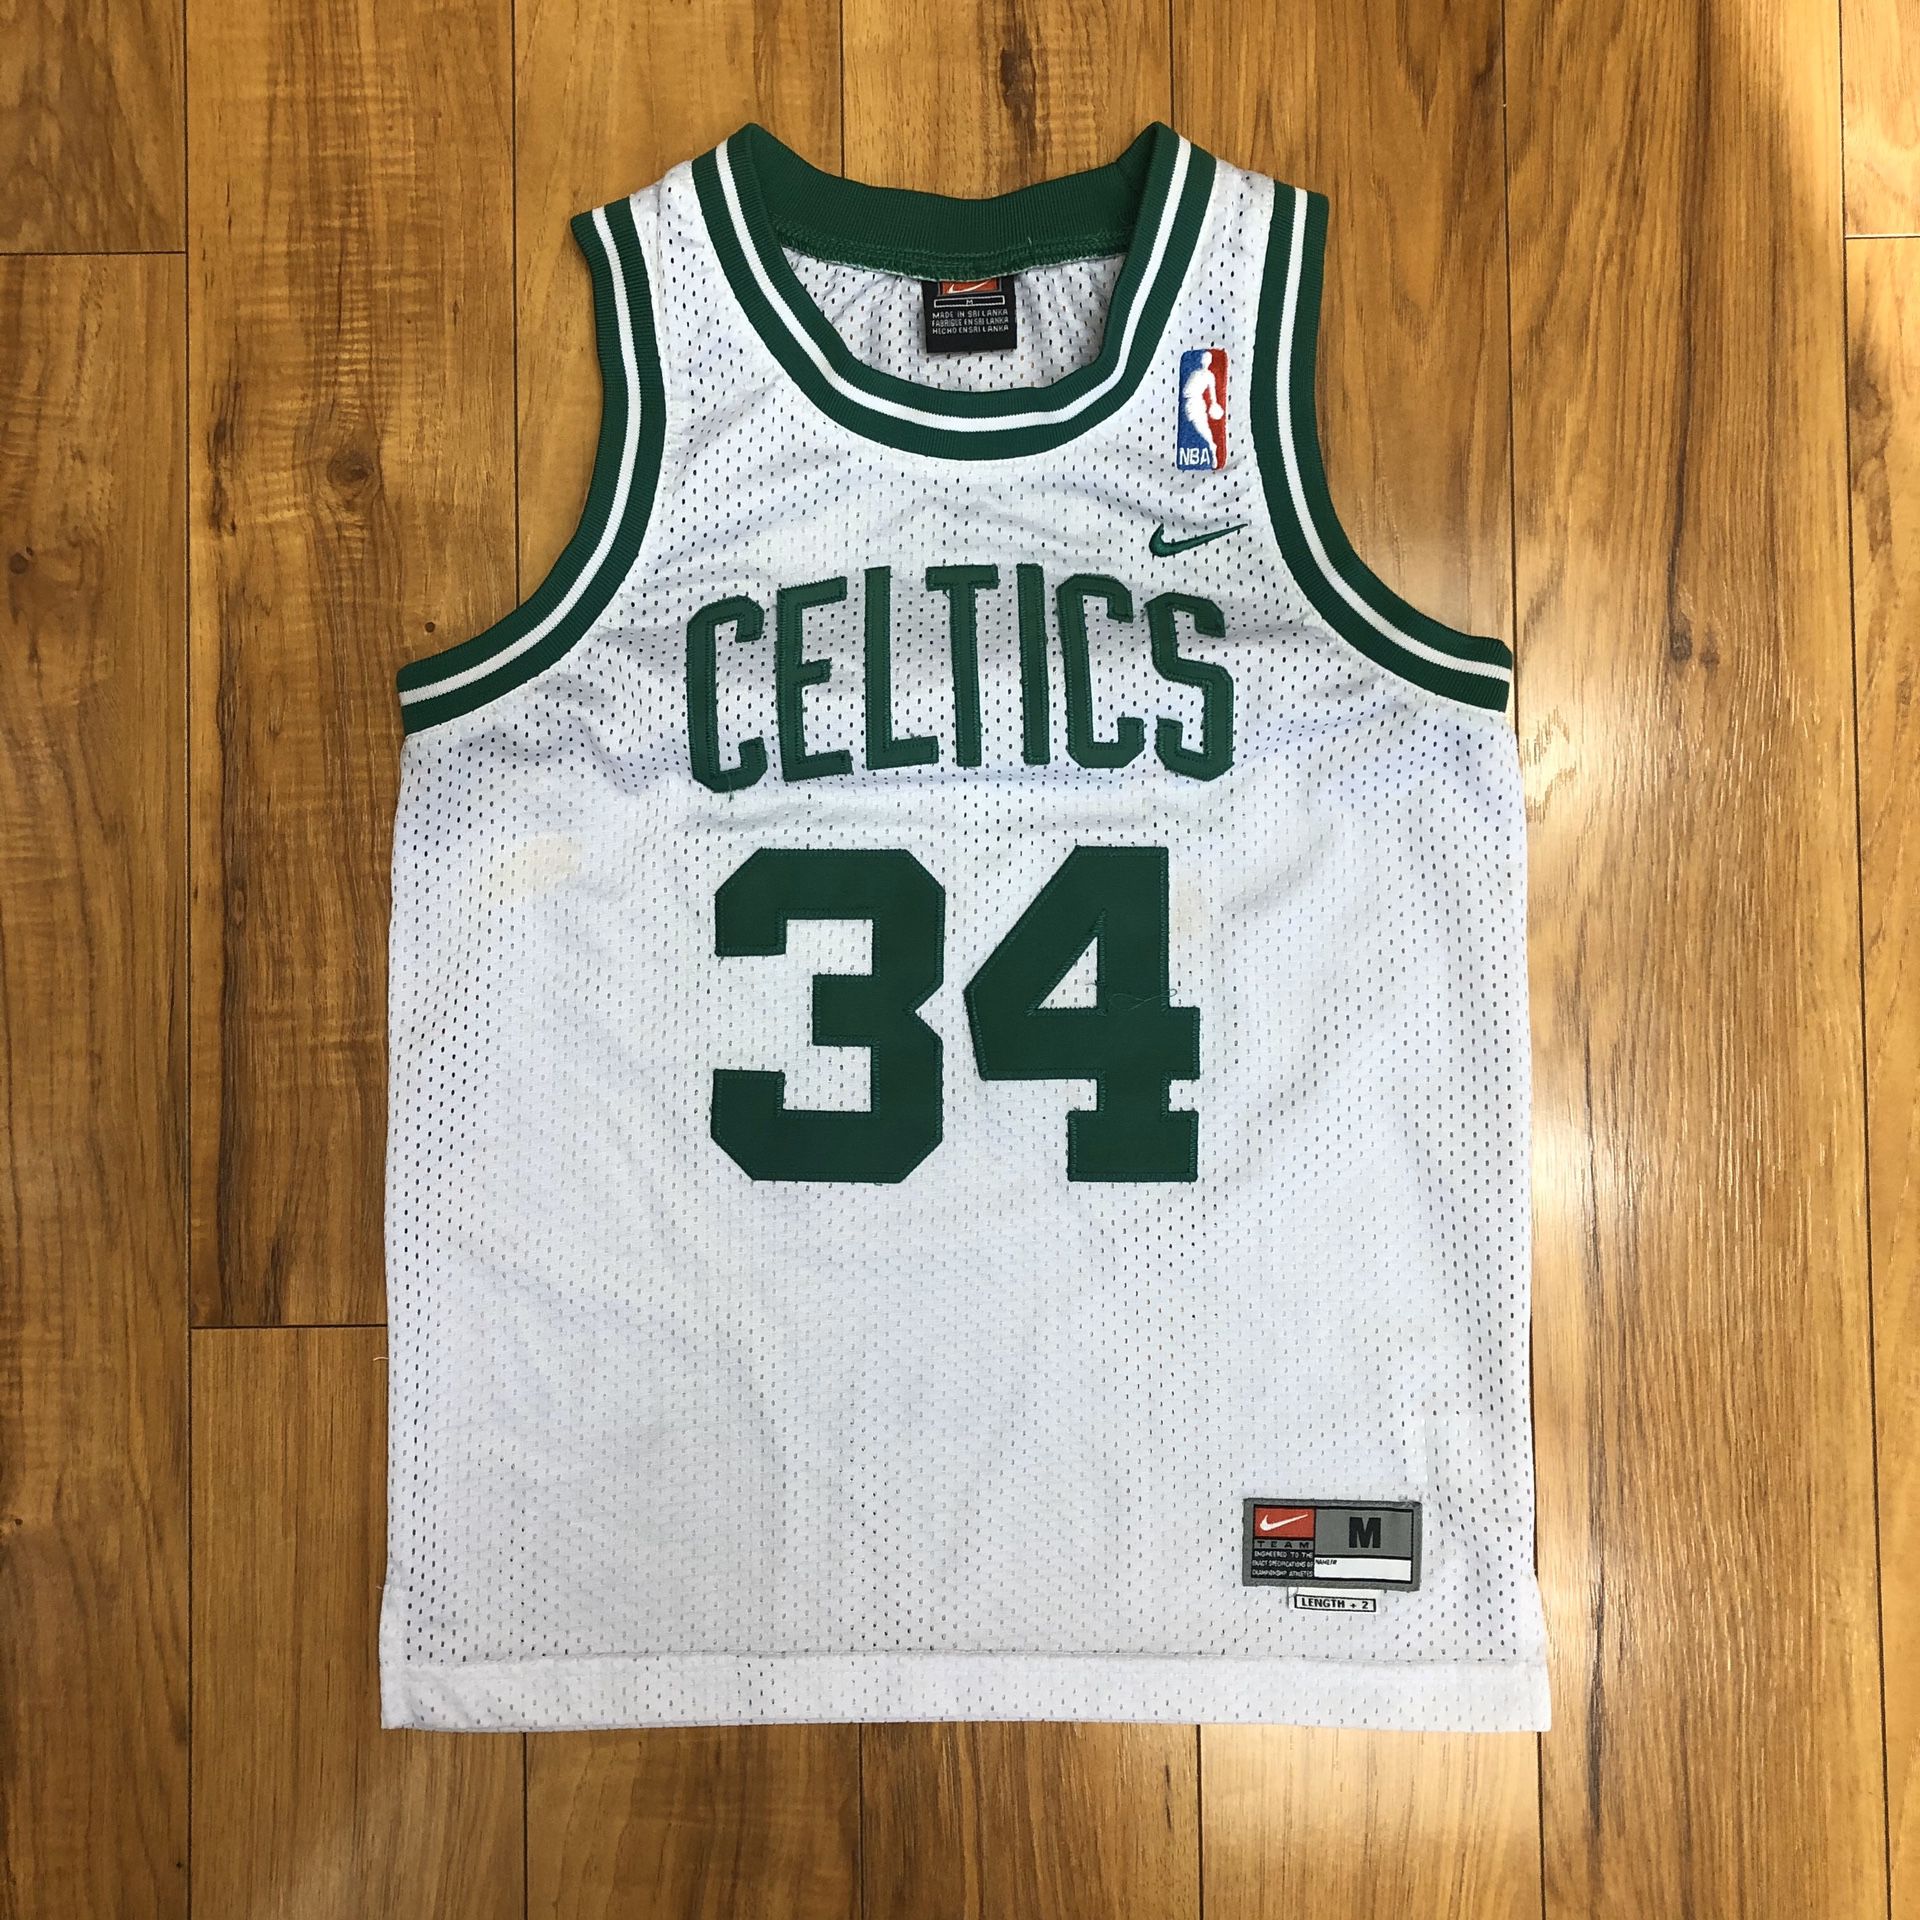 Vintage Paul Pierce Boston Celtics Nike NBA Jersey Youth Size Medium This jersey has minor stains on the front which are near the top right shoulde